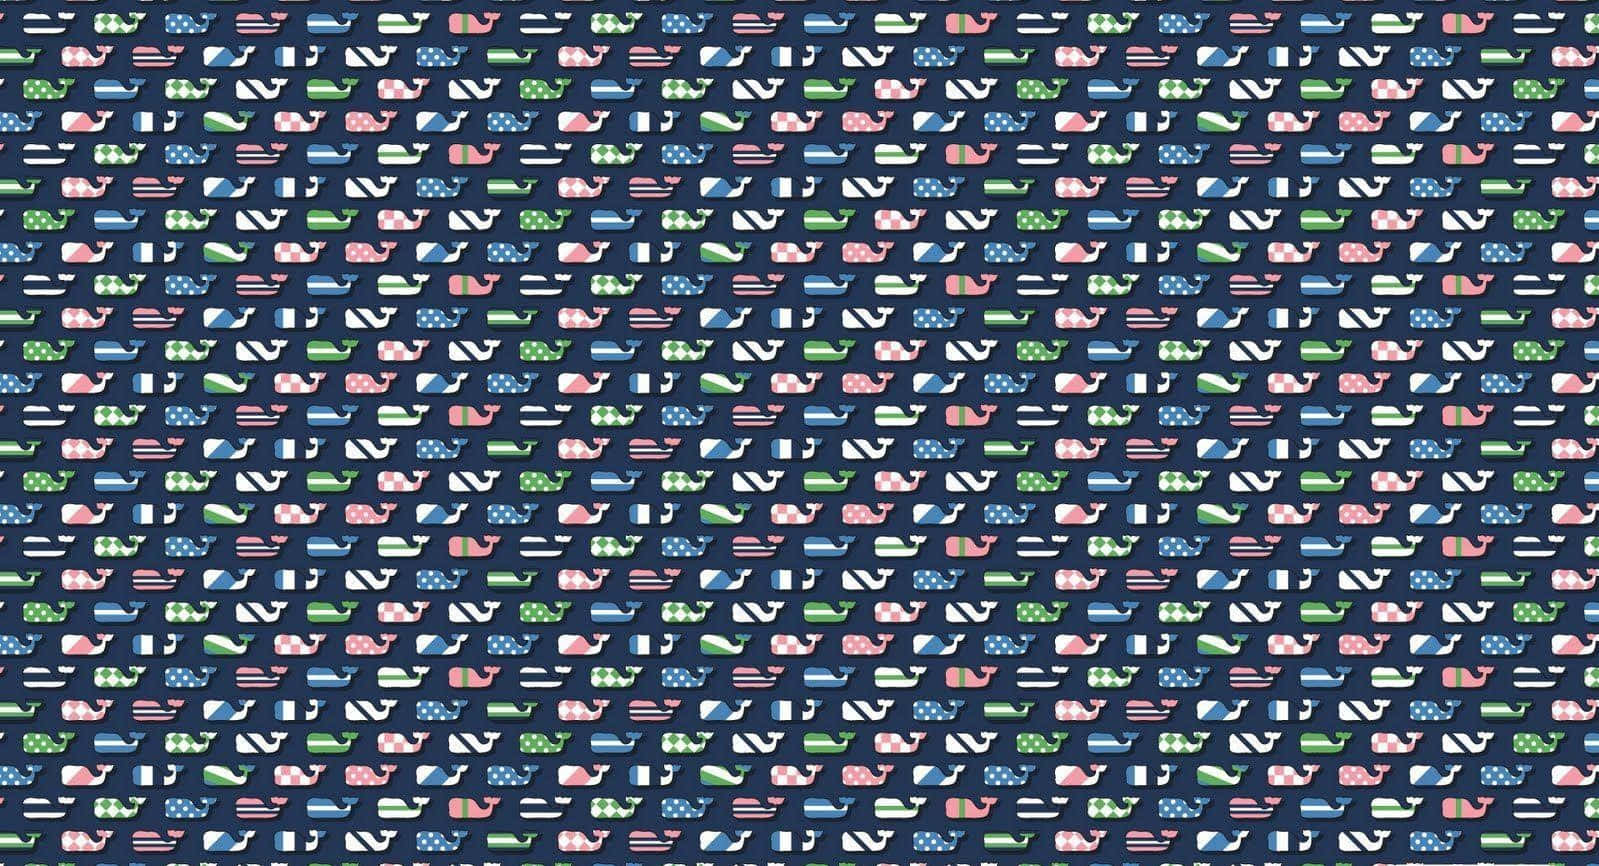 Enjoy the finer things in life with Vineyard Vines Wallpaper